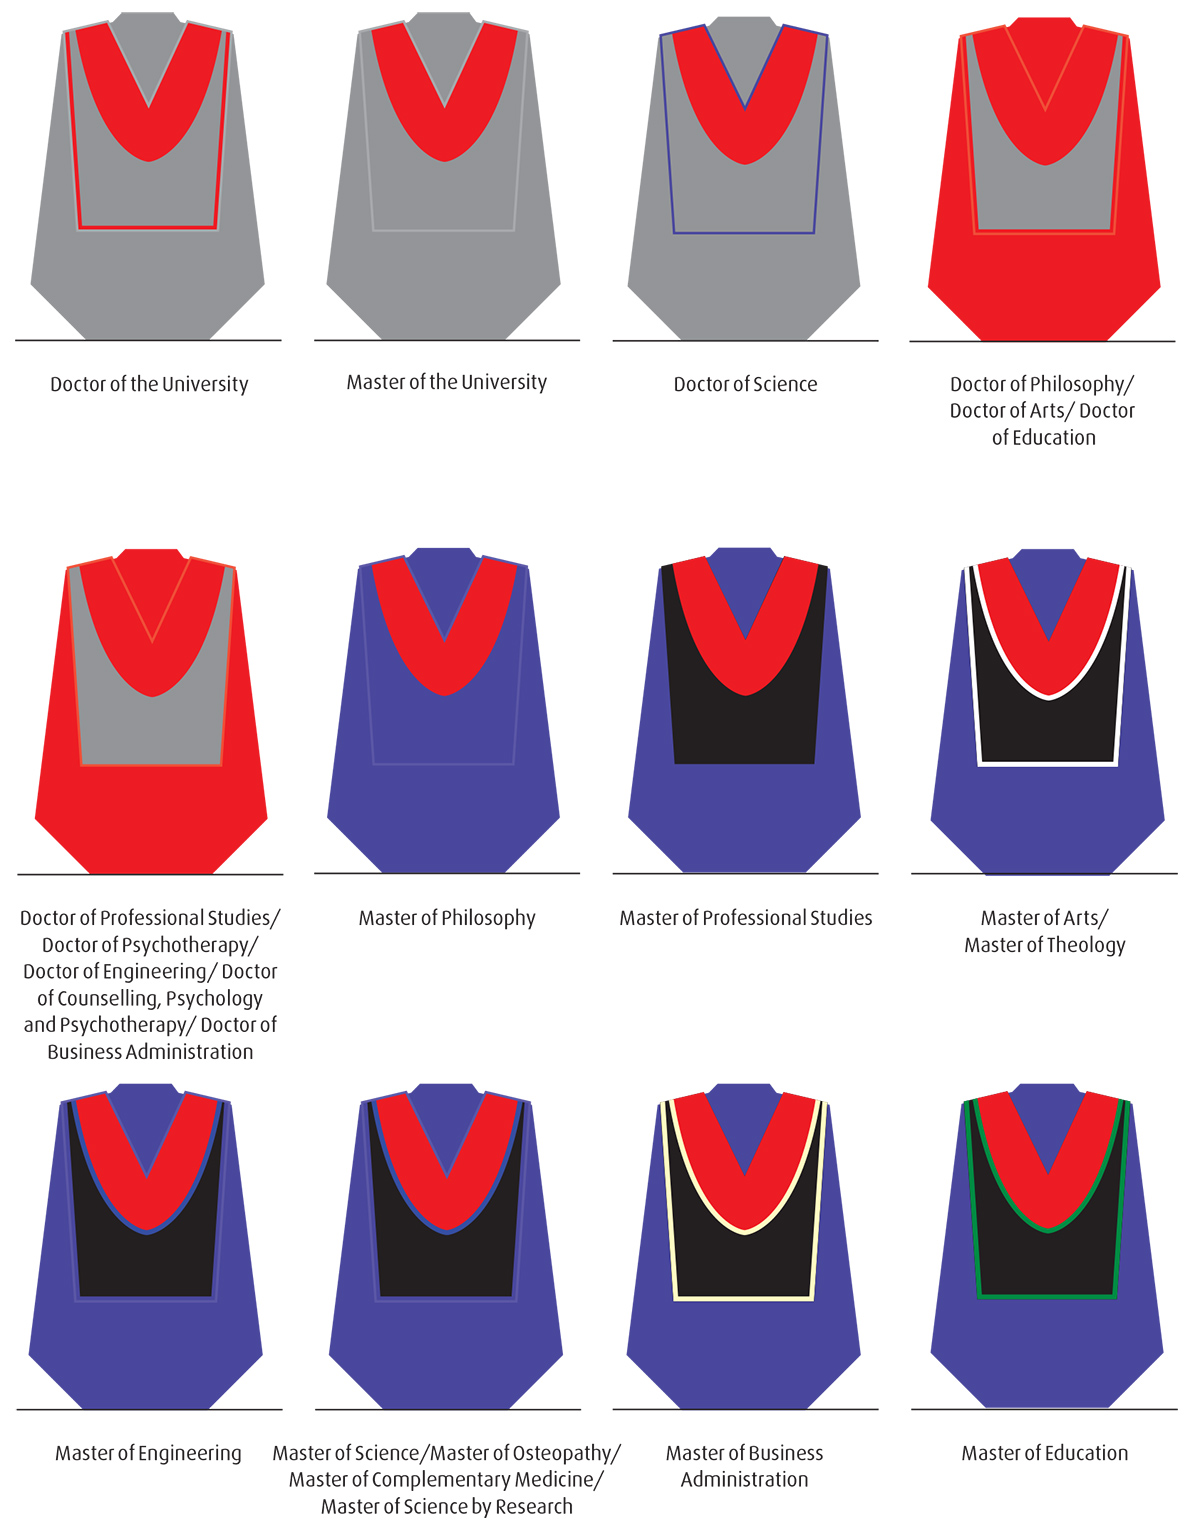 A chart of the various academic dress